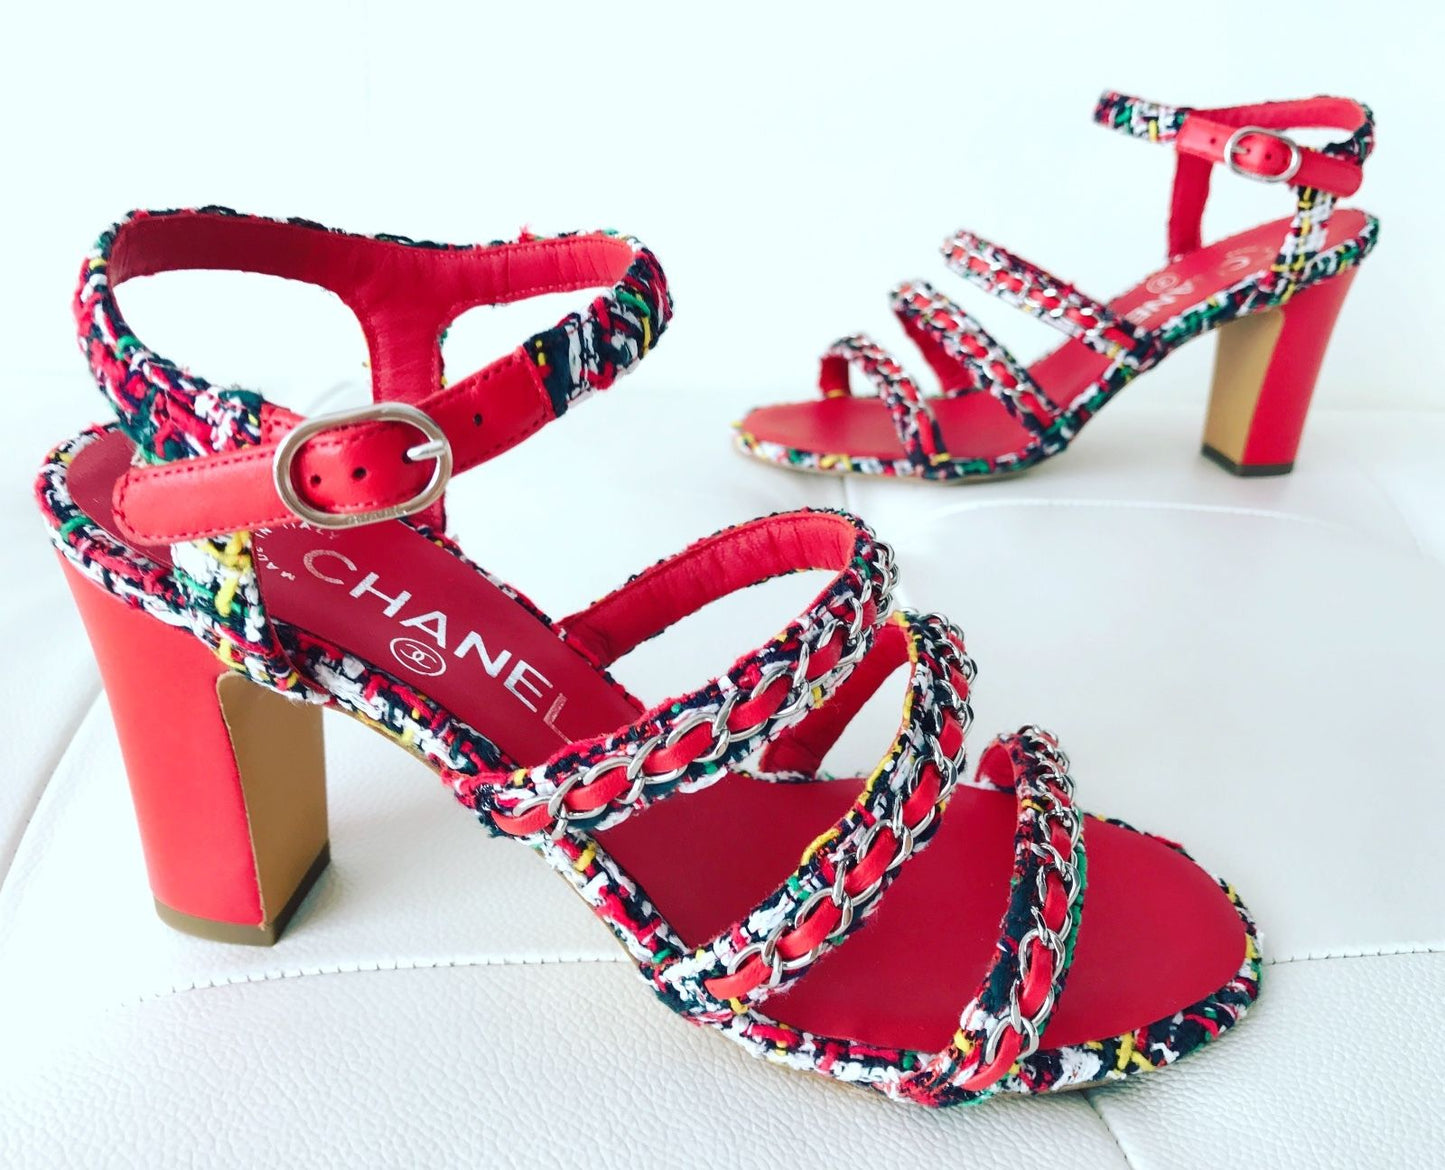 $1.1K CHANEL RED LEATHER MULTICOLOR TWEED CHAINED CHAIN SANDAL SANDALS OPEN TOE SHOES